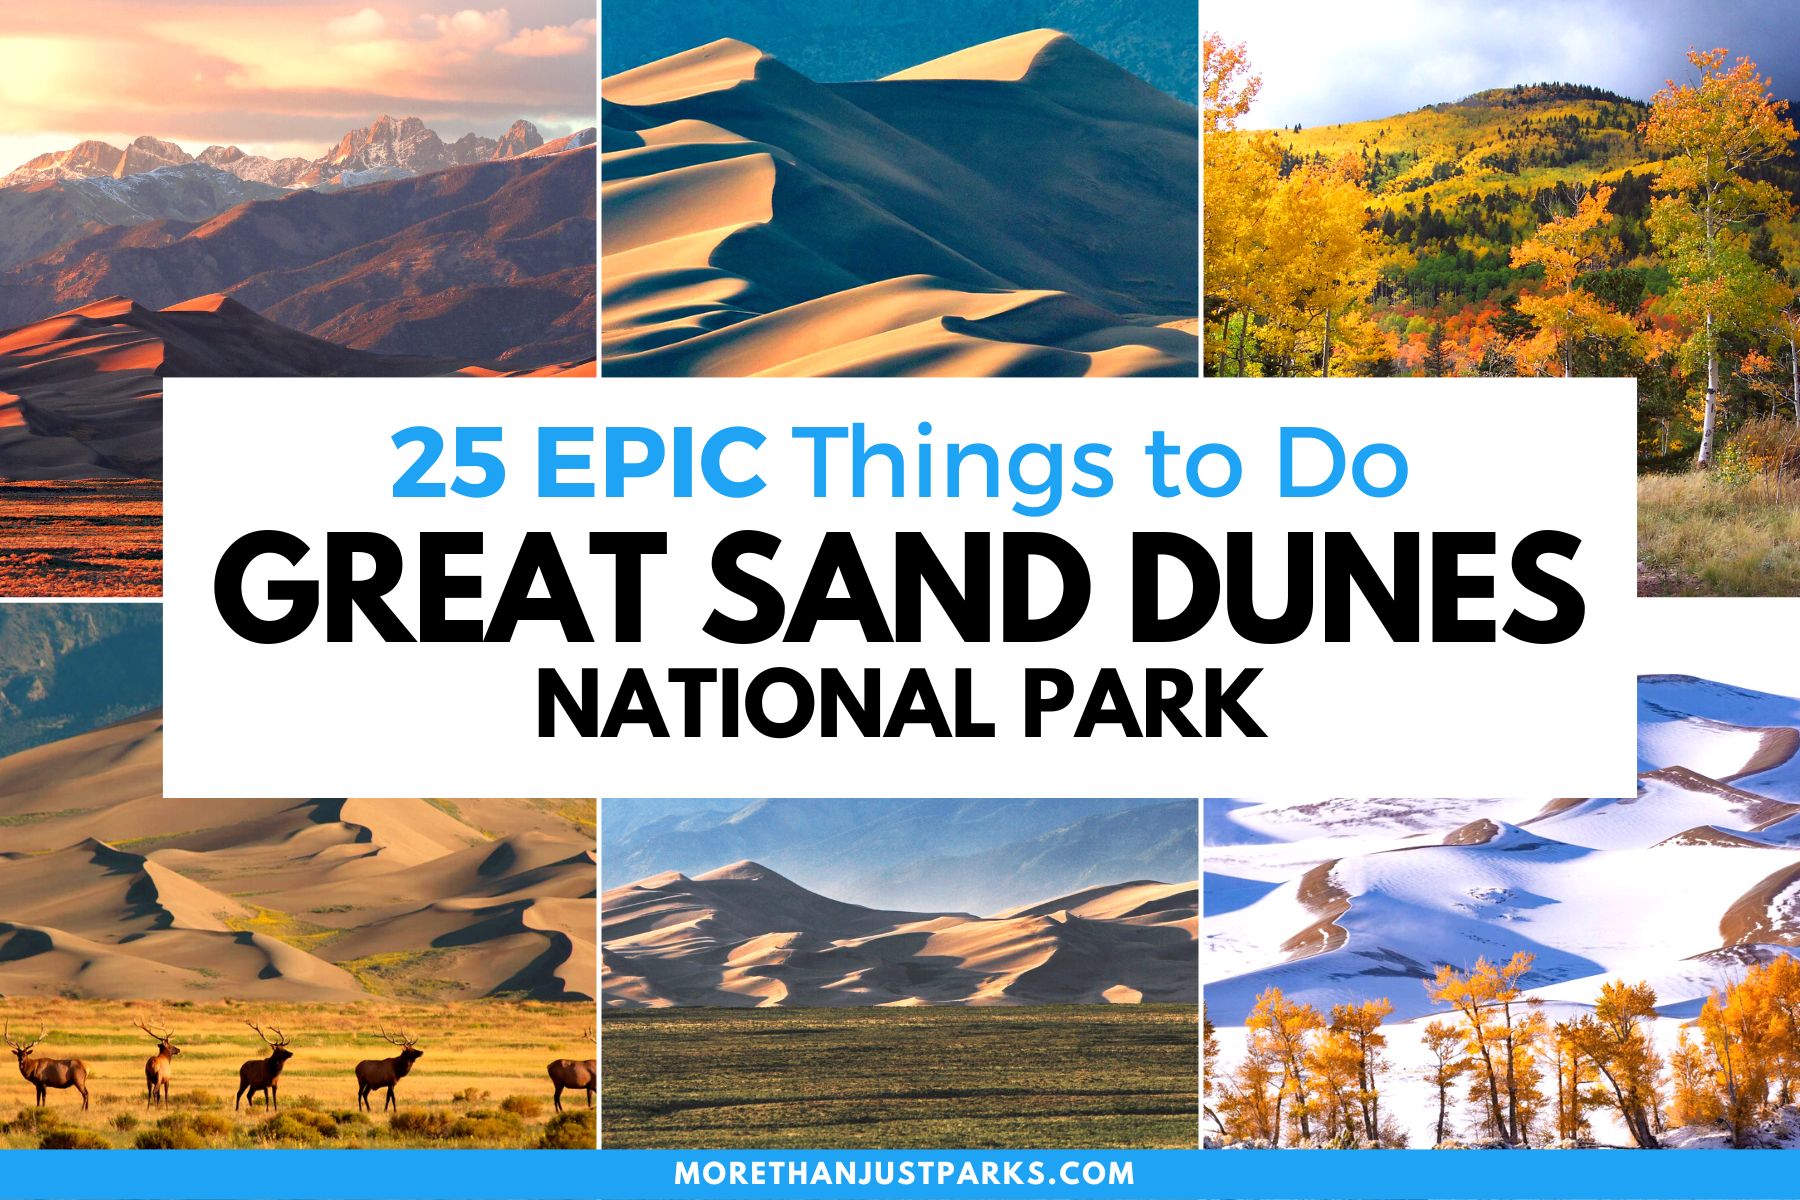 things to do great sand dunes national park, things to do great sand dunes colorado